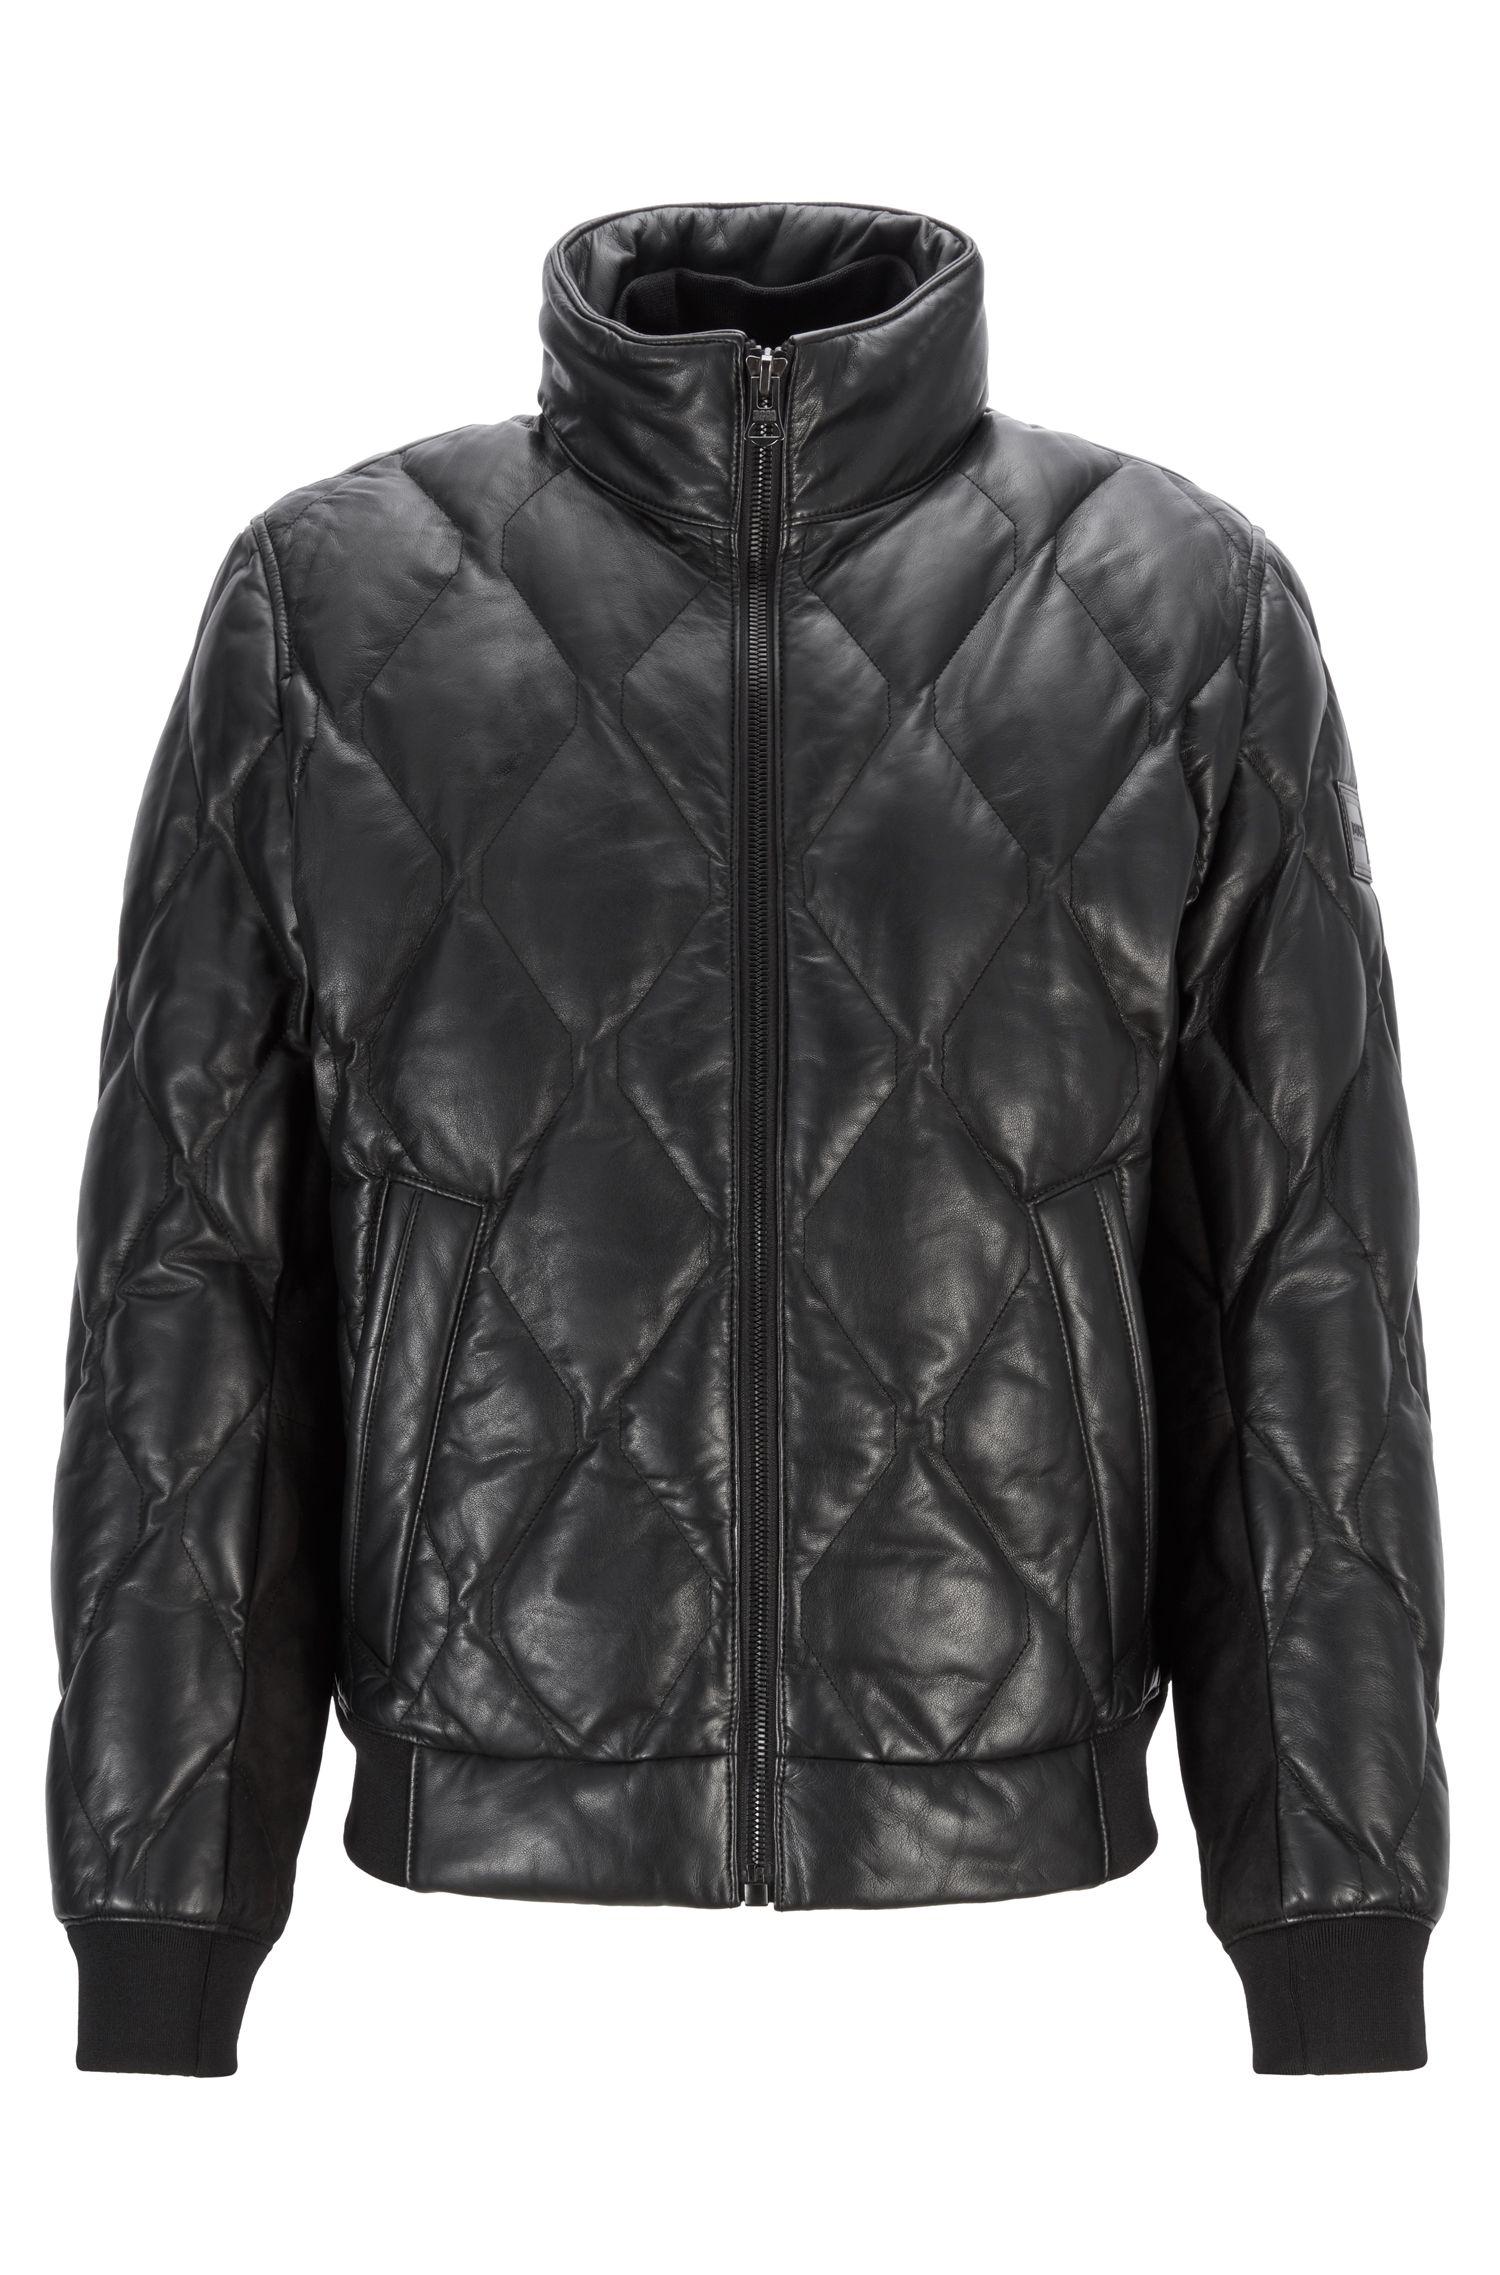 BOSS Quilted Bomber Jacket In Olive-tanned Leather in Black for Men - Lyst